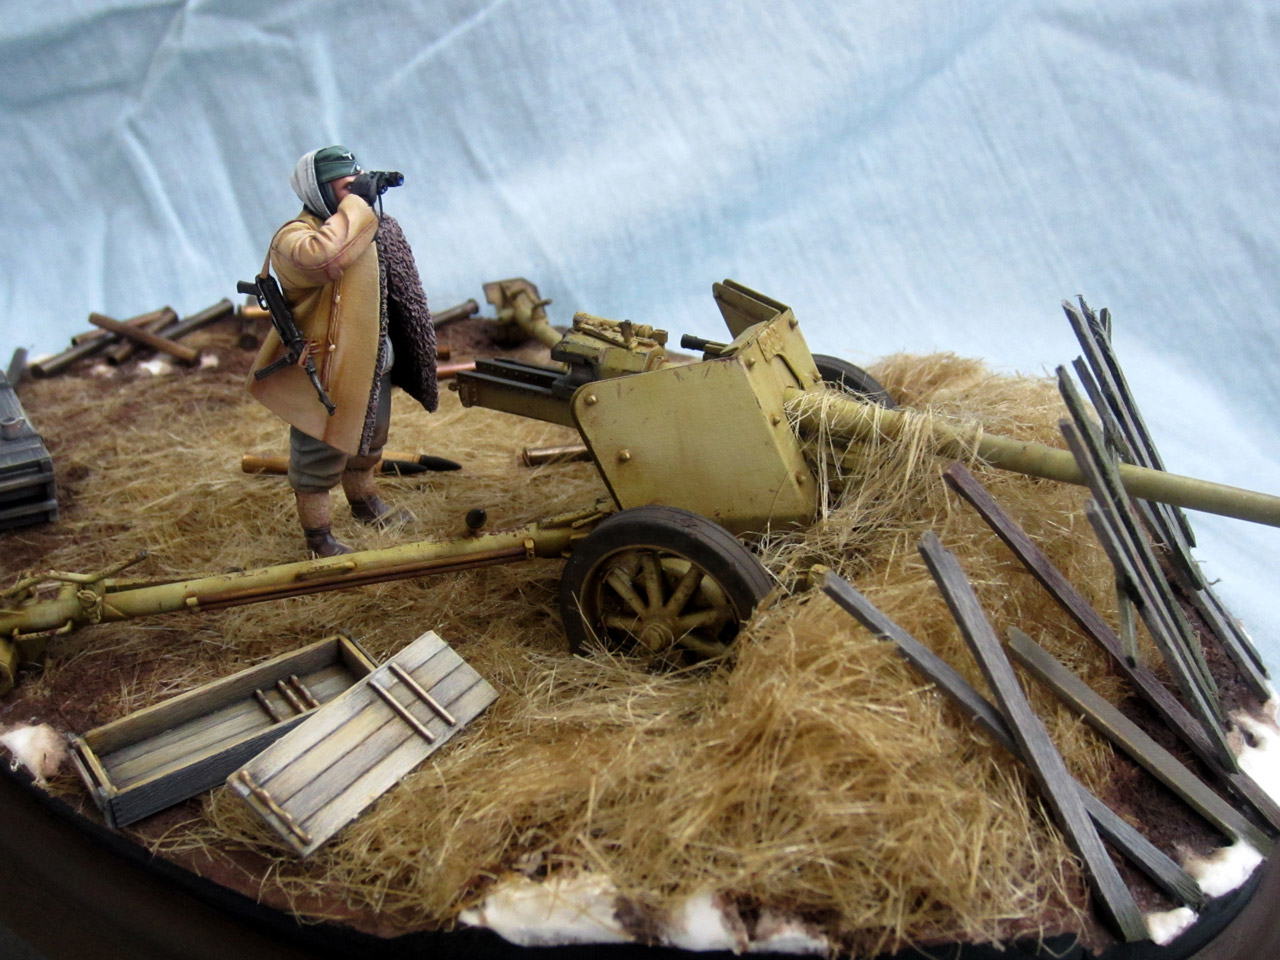 Dioramas and Vignettes: The Silence, photo #3